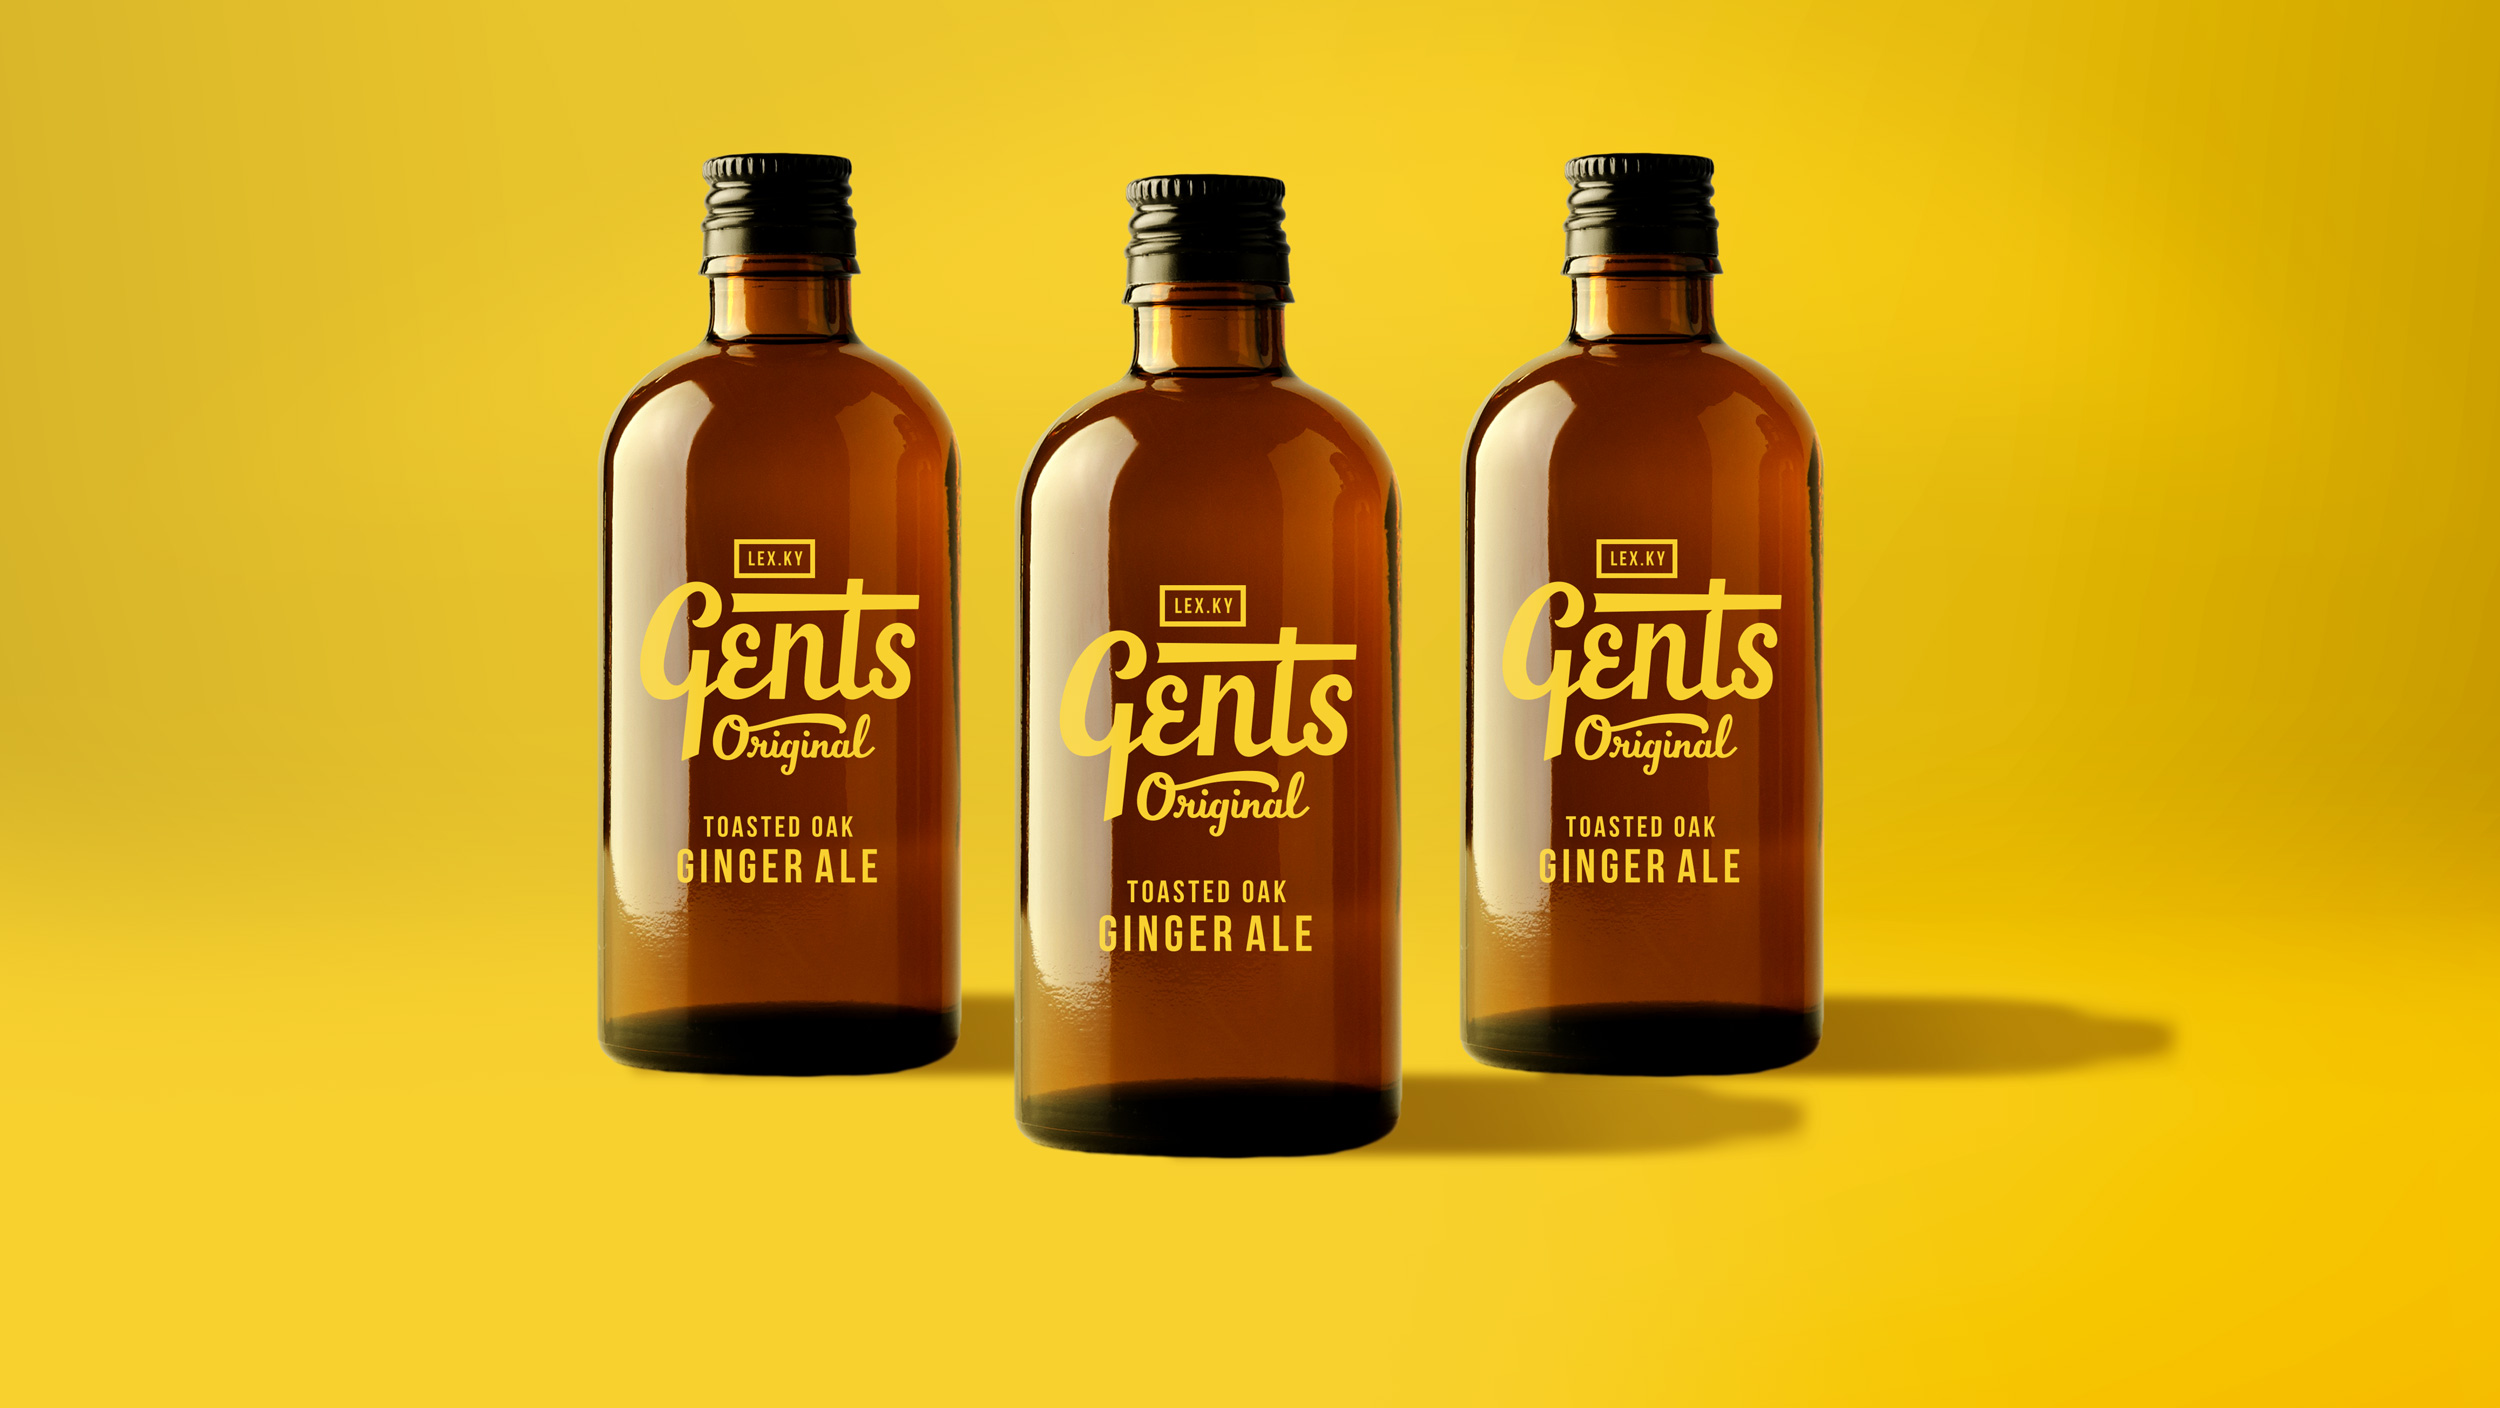 Gents Giner Ale brand identity - logo and packaging